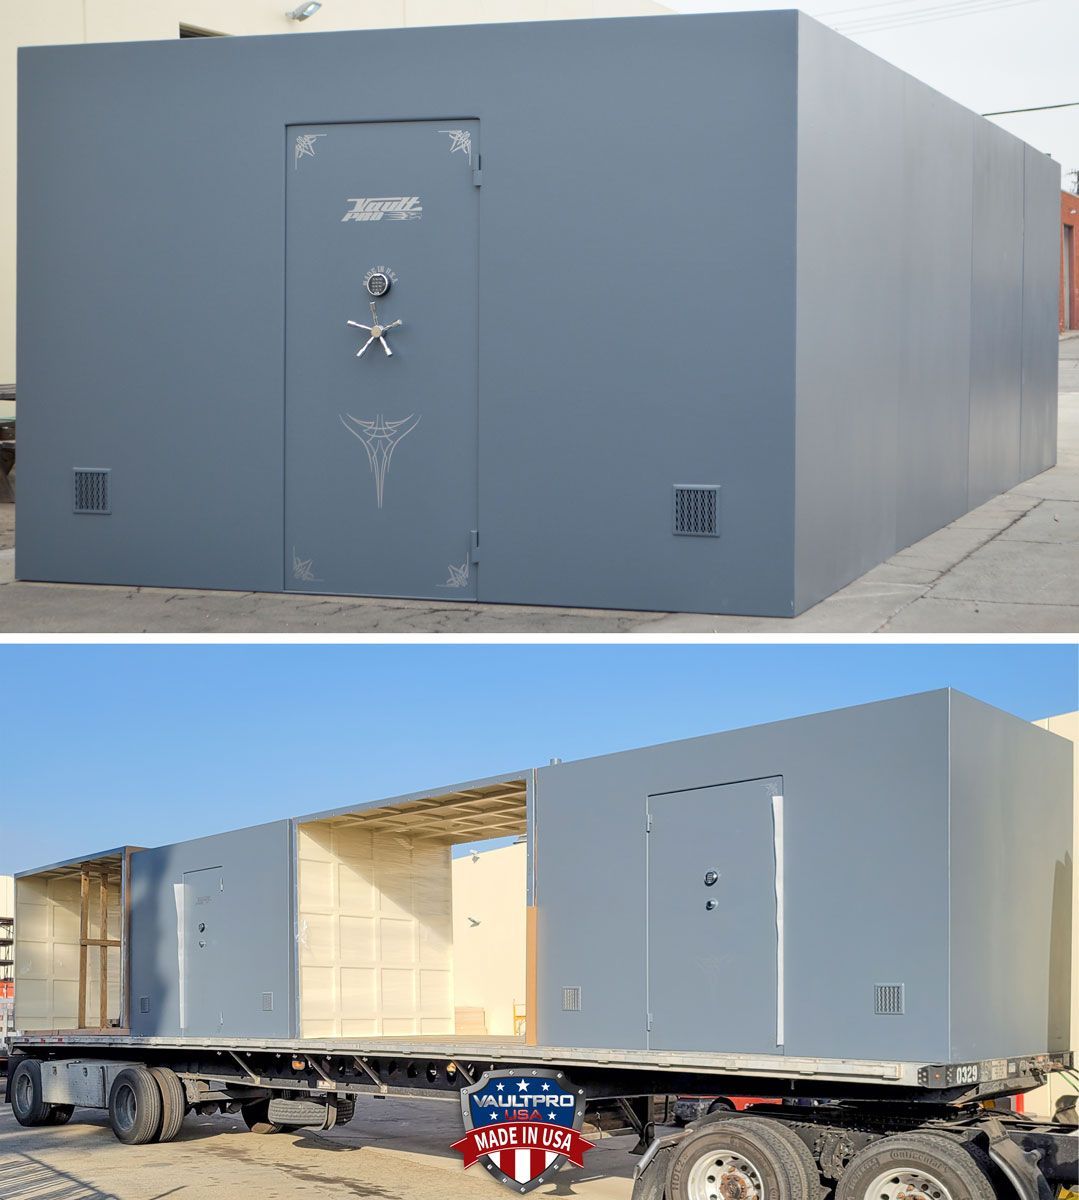 Image of super large shelter safe room made by Vault Pro USA being shipped by flatbed truck.